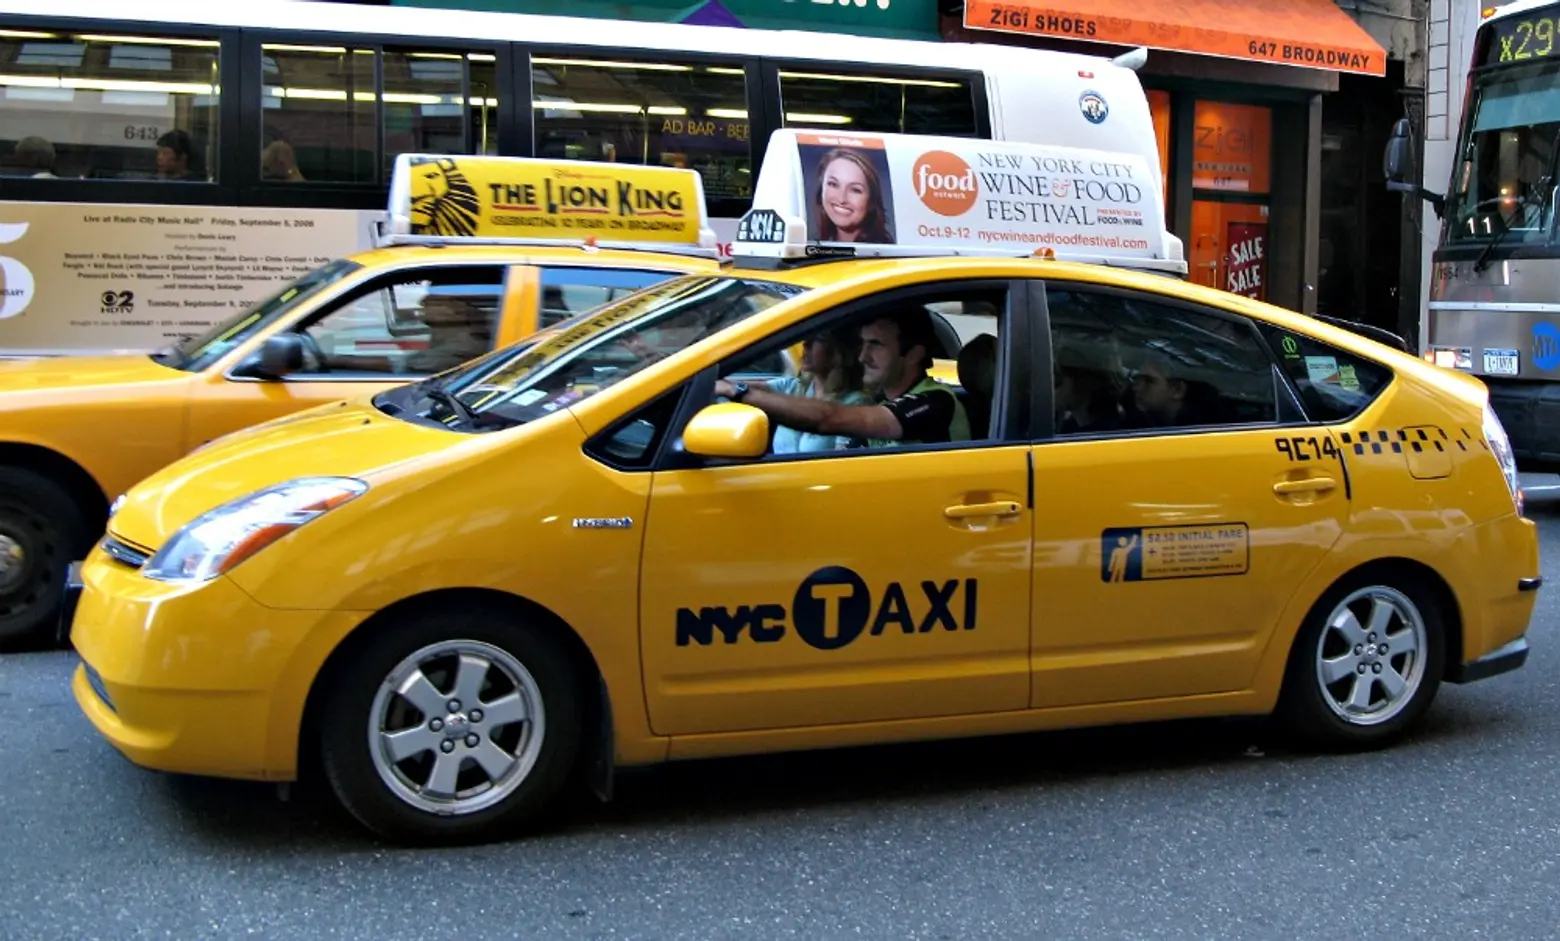 Are Taxis Safer Than Uber?; New York’s Disappearing ‘Papaya’ Hot Dog Chains